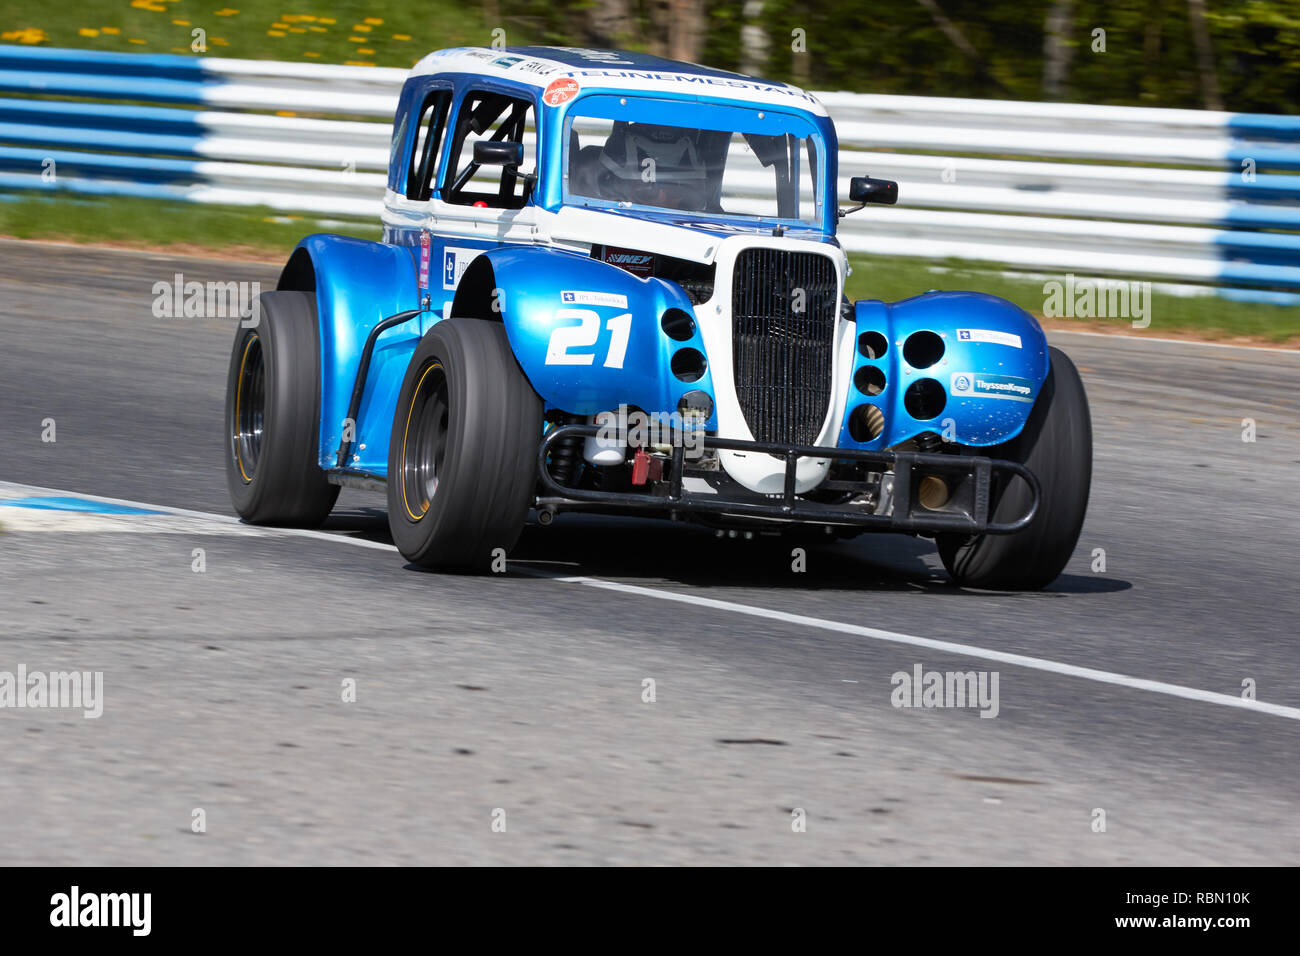 HÄMEENLINNA, FINLAND – APRIL 11 2016: A classic racecar at high speed on racetrack on open practise day at Ahvenisto Race Circuit in Finland. This was Stock Photo